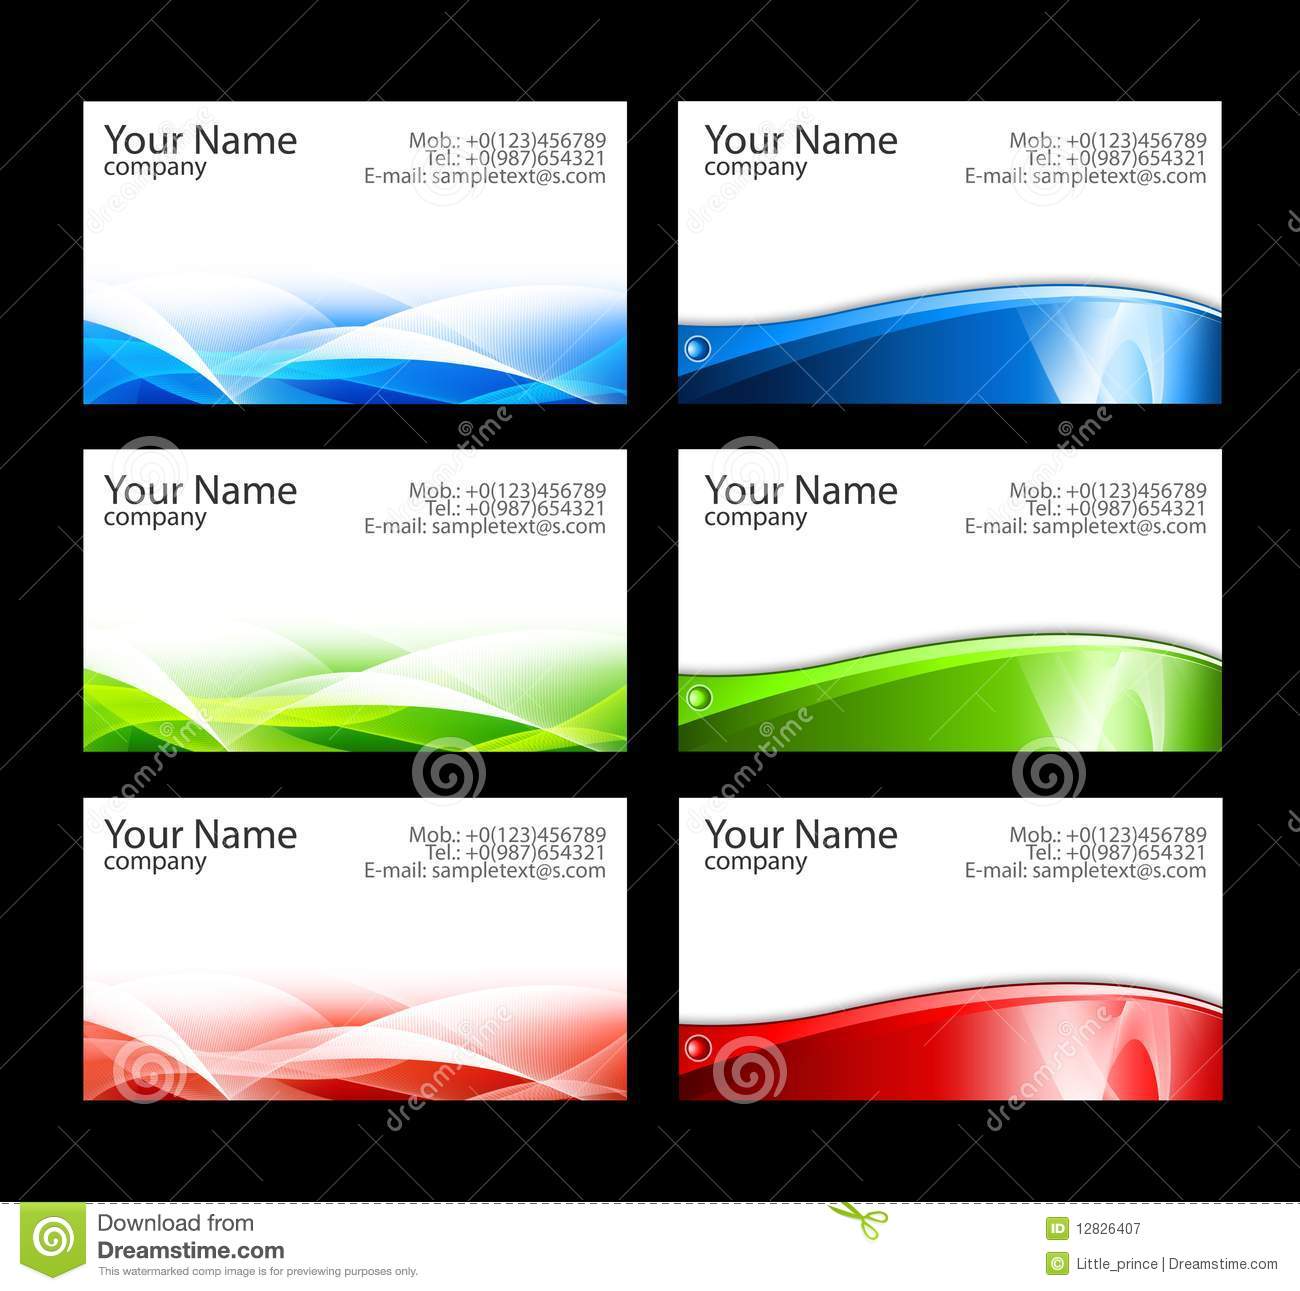 word-23-business-card-template